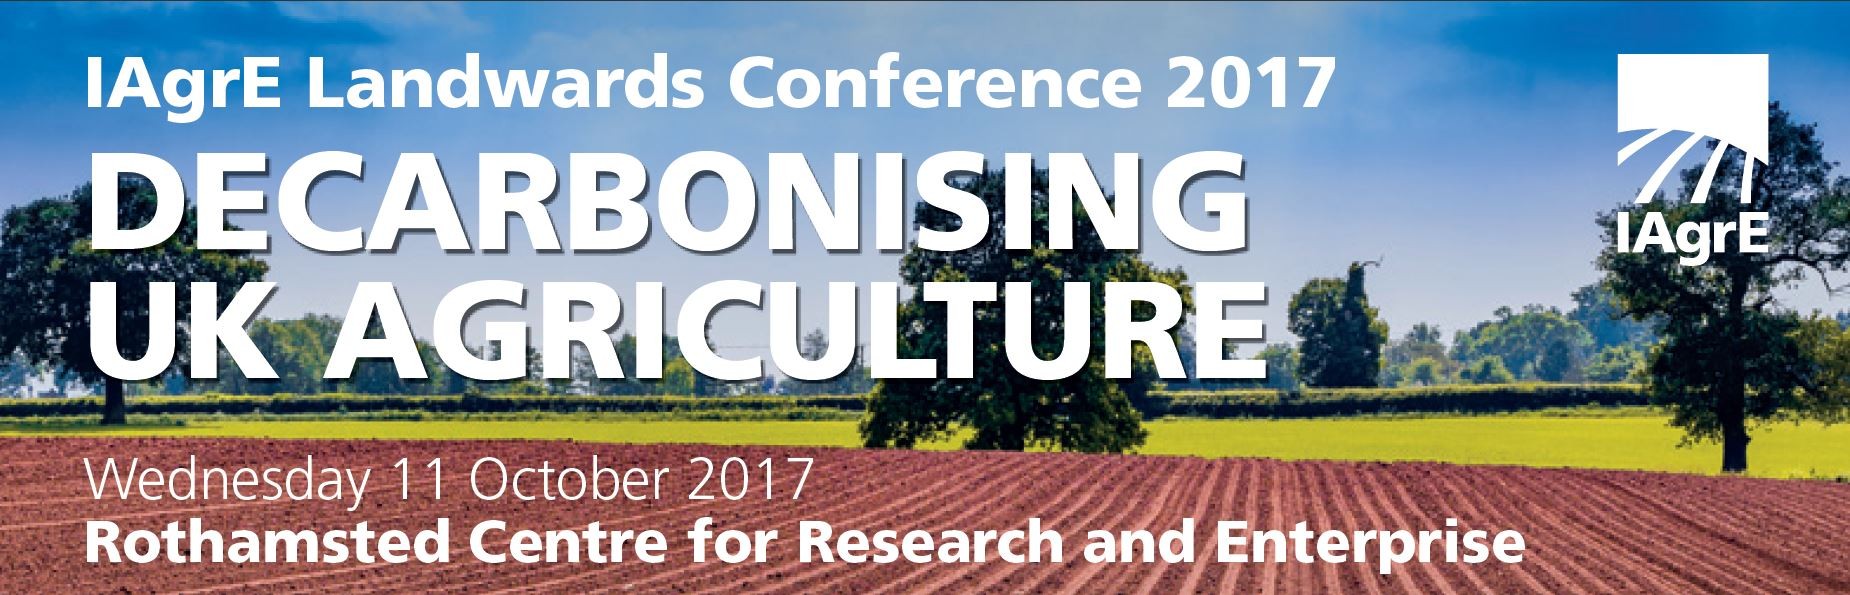 IAgrE Conference 2017 - Decarbonising UK Agriculture